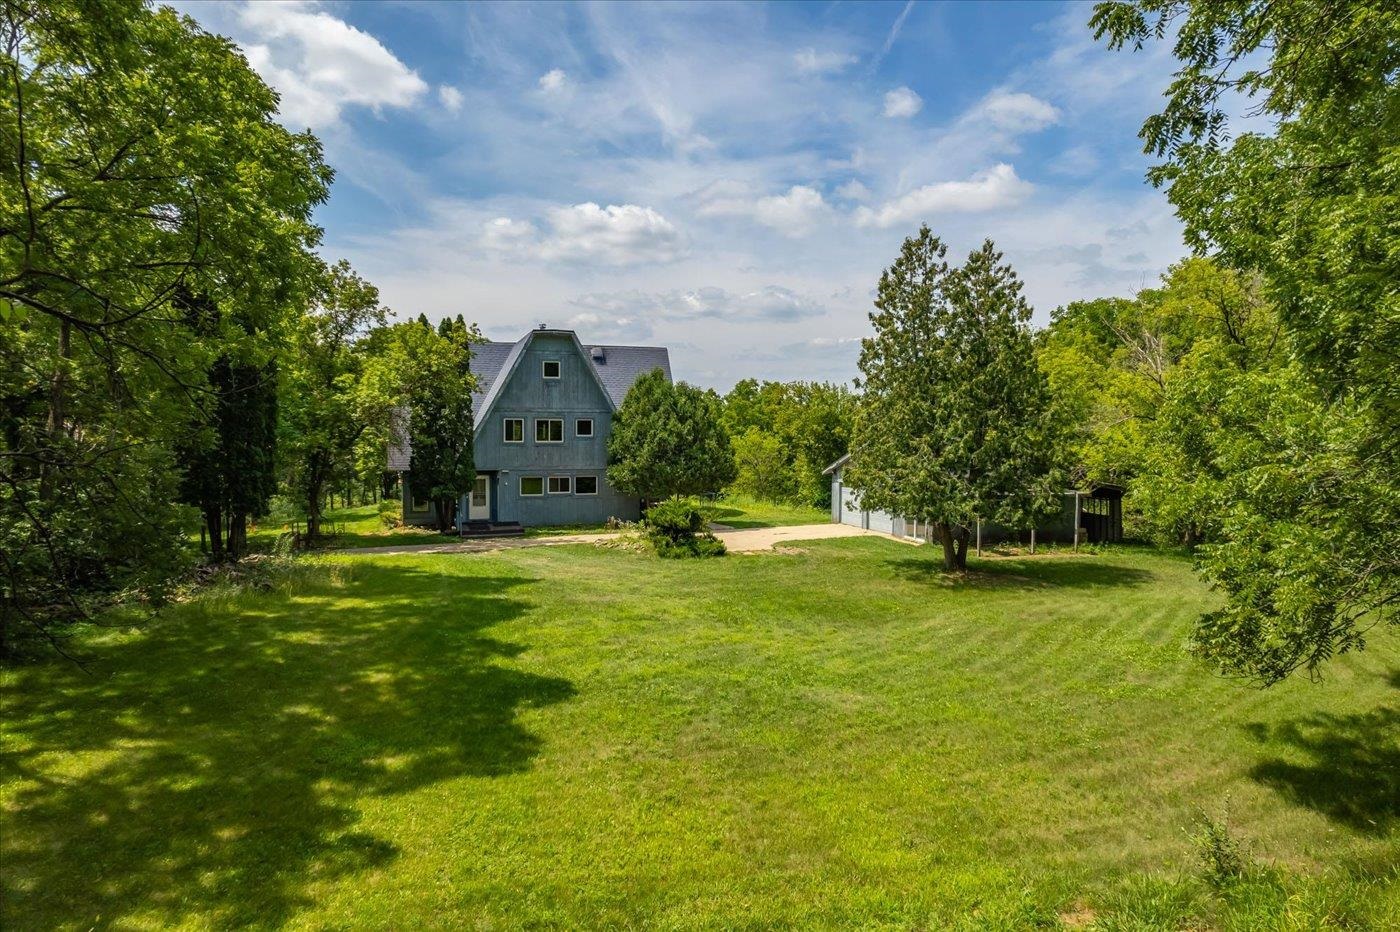 This picturesque Vermont Valley property offers ~49ac of wooded solitude just 30 min from the Capitol.  The land has been thoughtfully managed for high quality timber and has current timber value of ~$315k per recent valuation.  This investment will grow exponentially as the Walnut stands mature in the next 10+/- years. The custom home features  3600+ sqft with 5+ bedrooms, 3 full and 2 half bathrooms or remove the house and build your Dream Home. The lot is exceptional.  The 2 car detached garage has a heated workshop, and the old 'grainery' offers additional storage.    Entirely new mound system was installed in 2022.